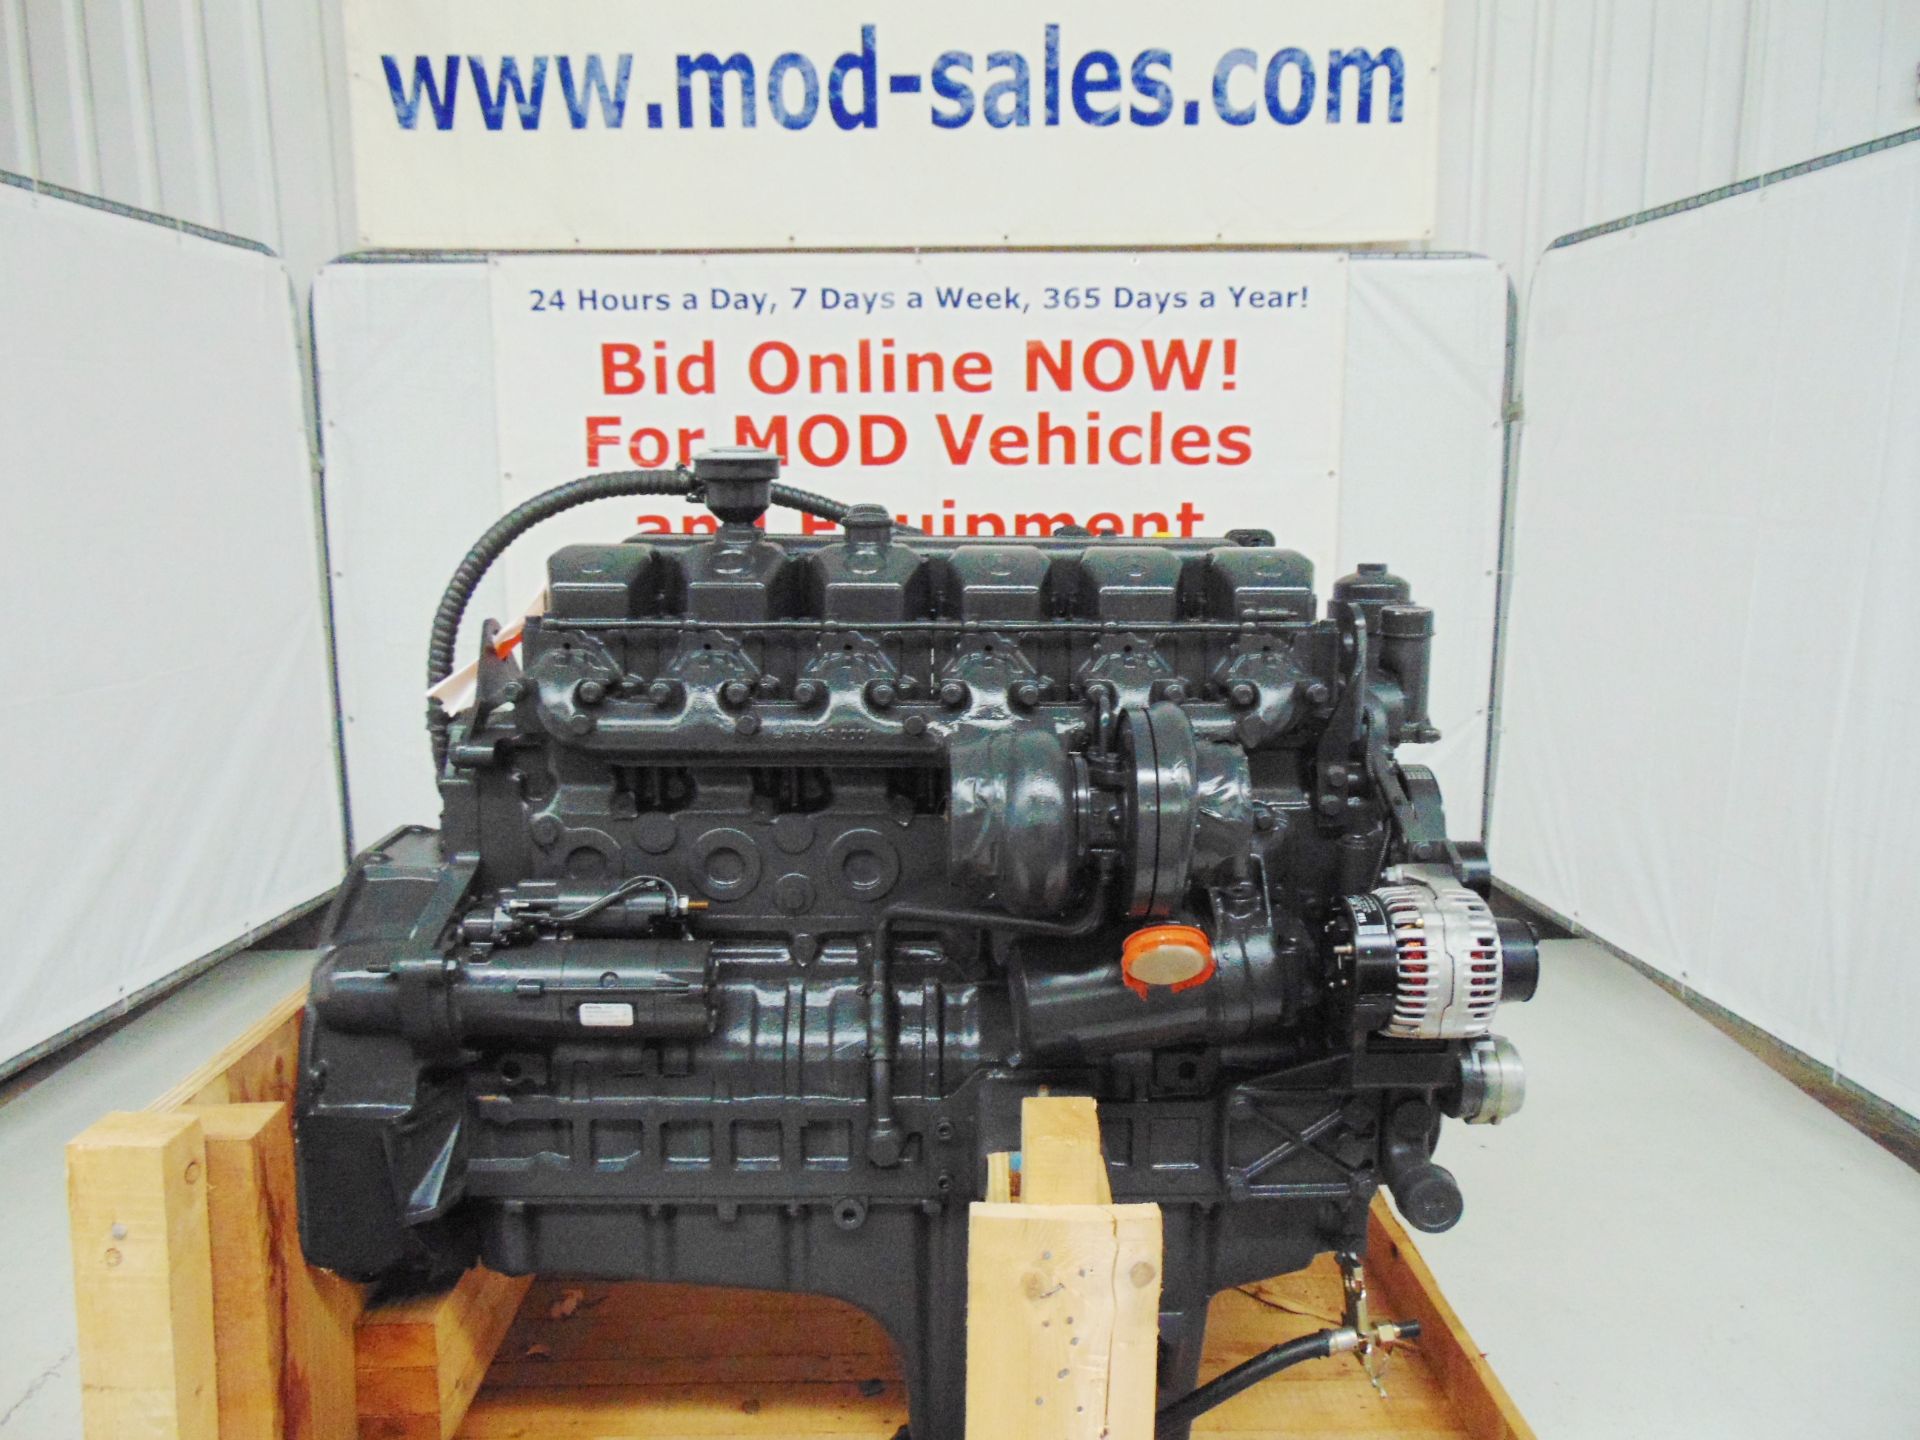 Factory Reconditioned Mercedes-Benz OM424 V12 Turbo Diesel Engine - Image 13 of 34